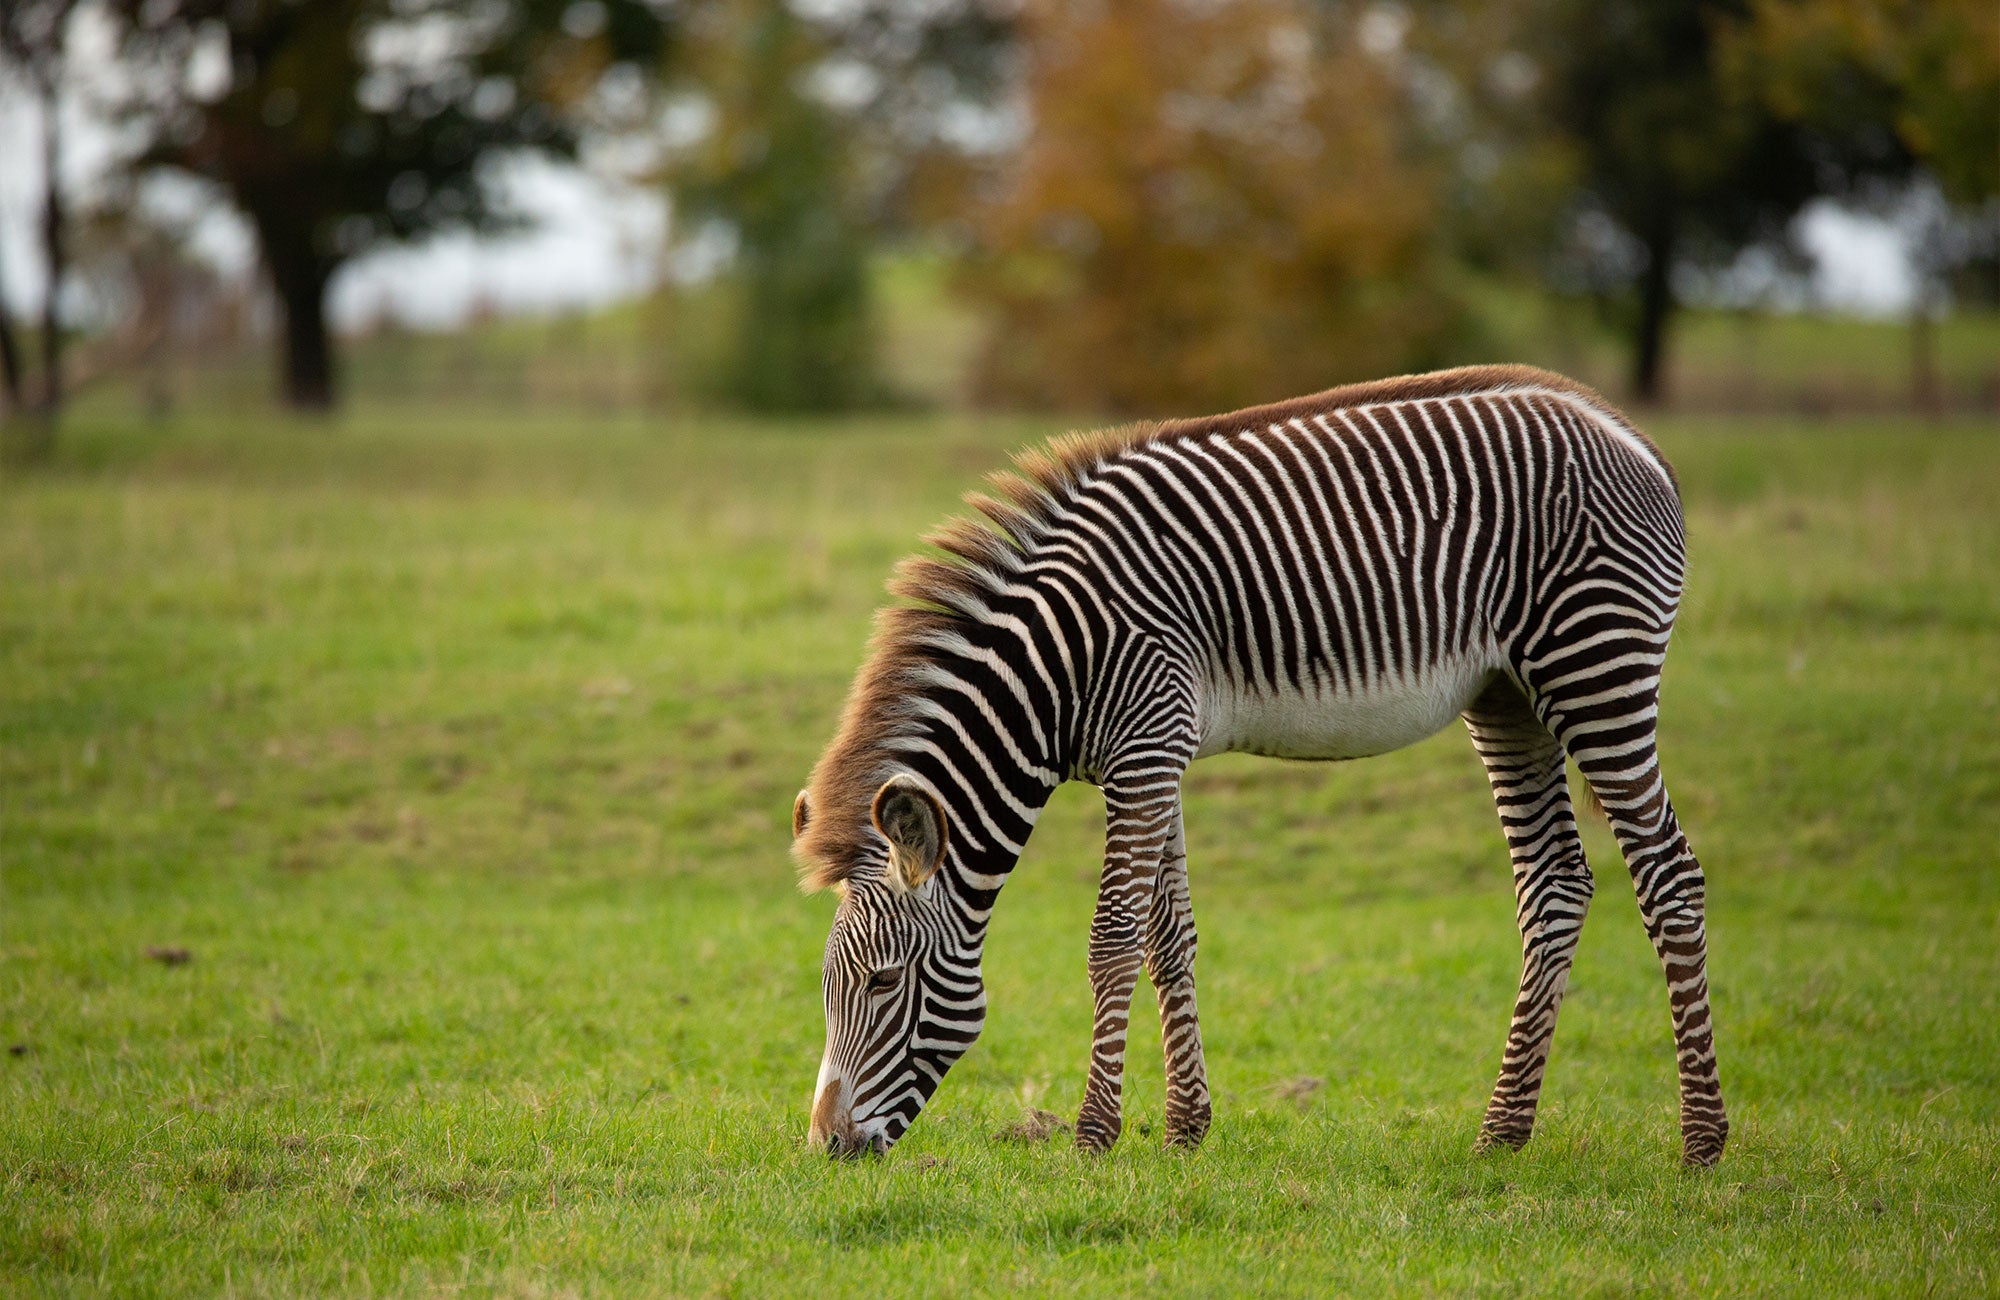 How did the zebra get its stripes? And other zebra facts and